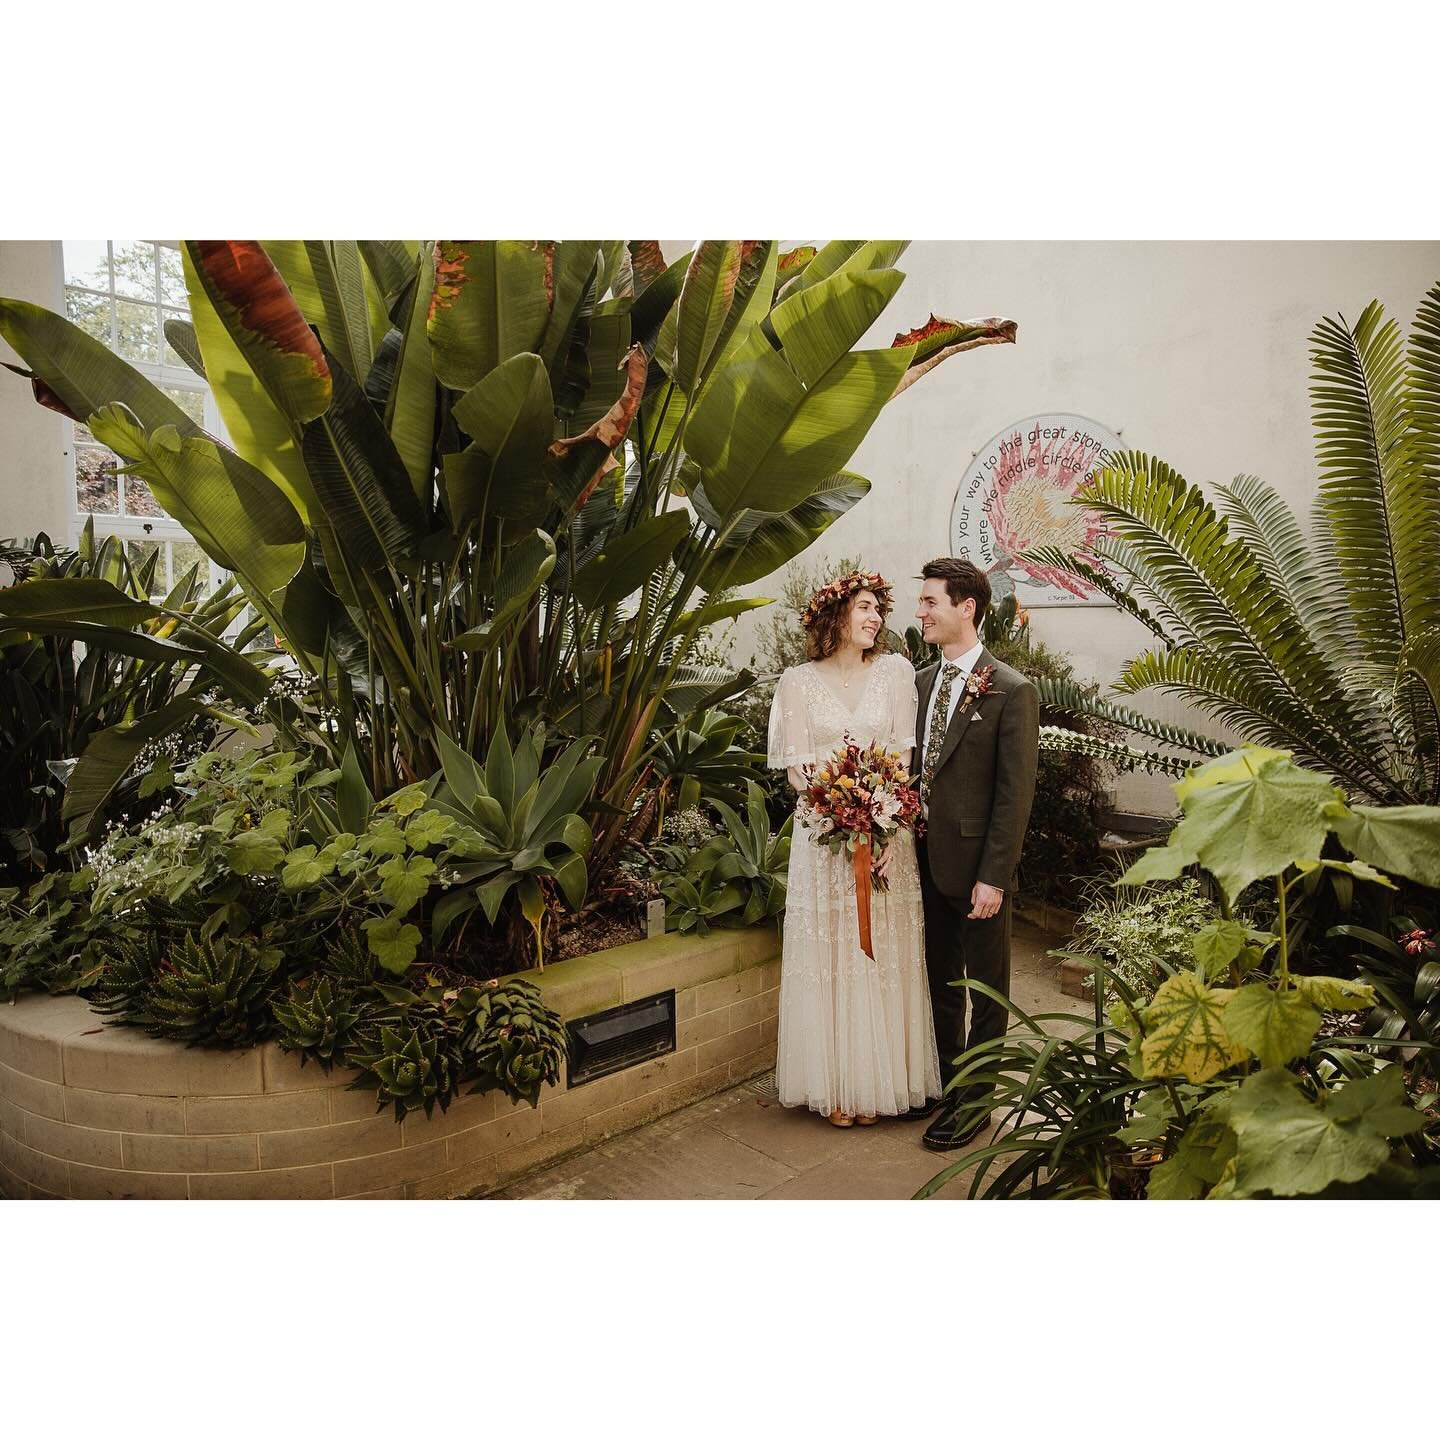 Previews from last weekends city centre wedding in Sheffield with Ruth &amp; Stan at The Botanical Gardens &amp; @99marystreet

//

Dress - @needleandthreadlondon
Shoes - @swedishhasbeens
Flowers - @elainesmitheman (Stans mum)
Suits - @mossbros
Cater